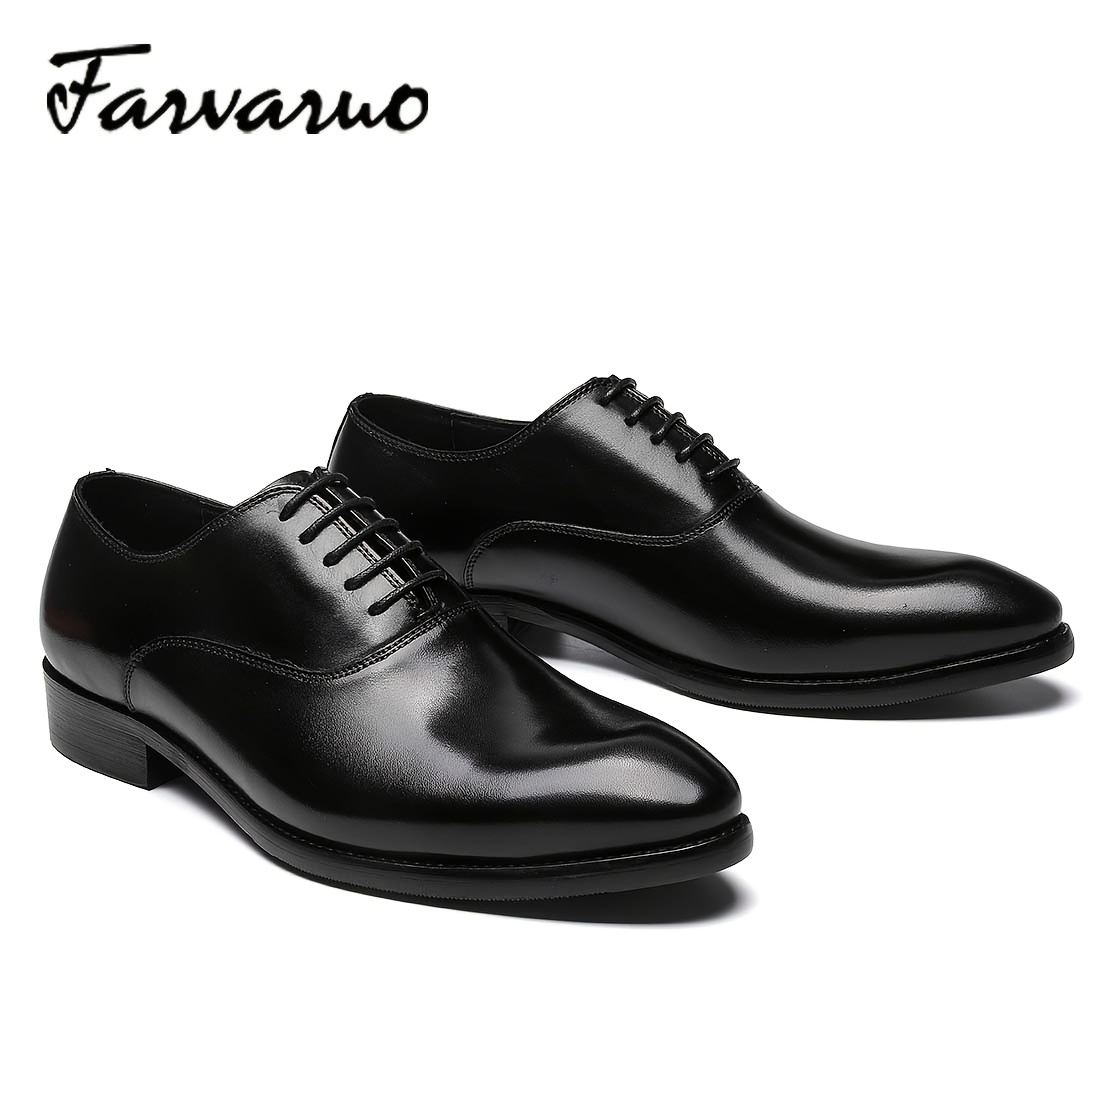 Men Patent Leather Dress Shoes Formal Oxford Comfort Pointy Toe Wedding  Shoes